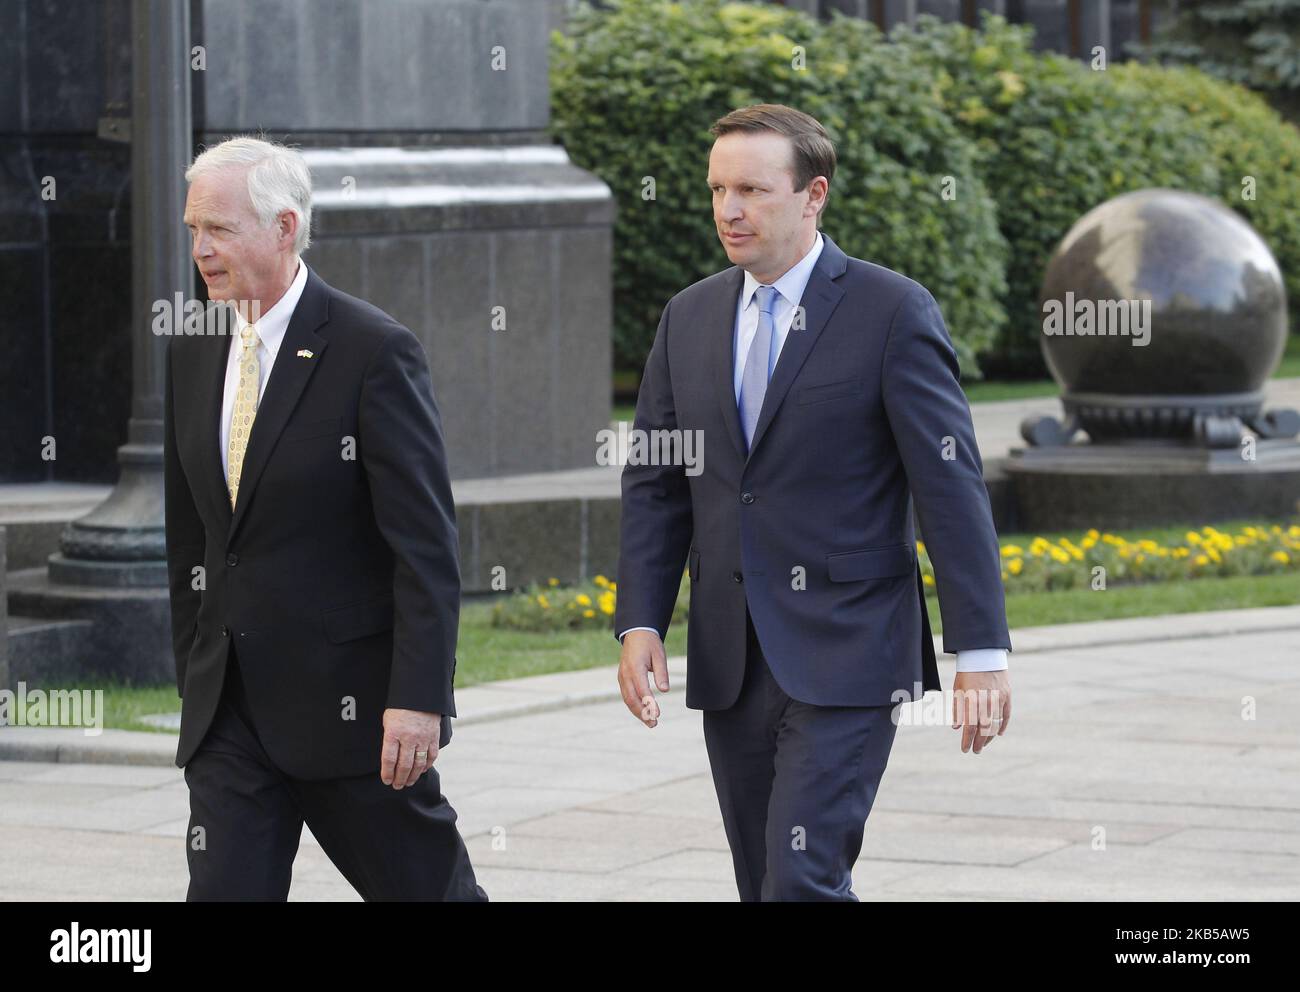 United States Senator Chris Murphy (Democrat of Connecticut)(R)and United States Senator Ron Johnson (Republican of Wisconsin)(L) arrive to a press conference after their meeting with Ukrainian President Volodymyr Zelensky, outside the Presidential Office in Kiev, Ukraine, on 5 September, 2019. (Photo by STR/NurPhoto) Stock Photo